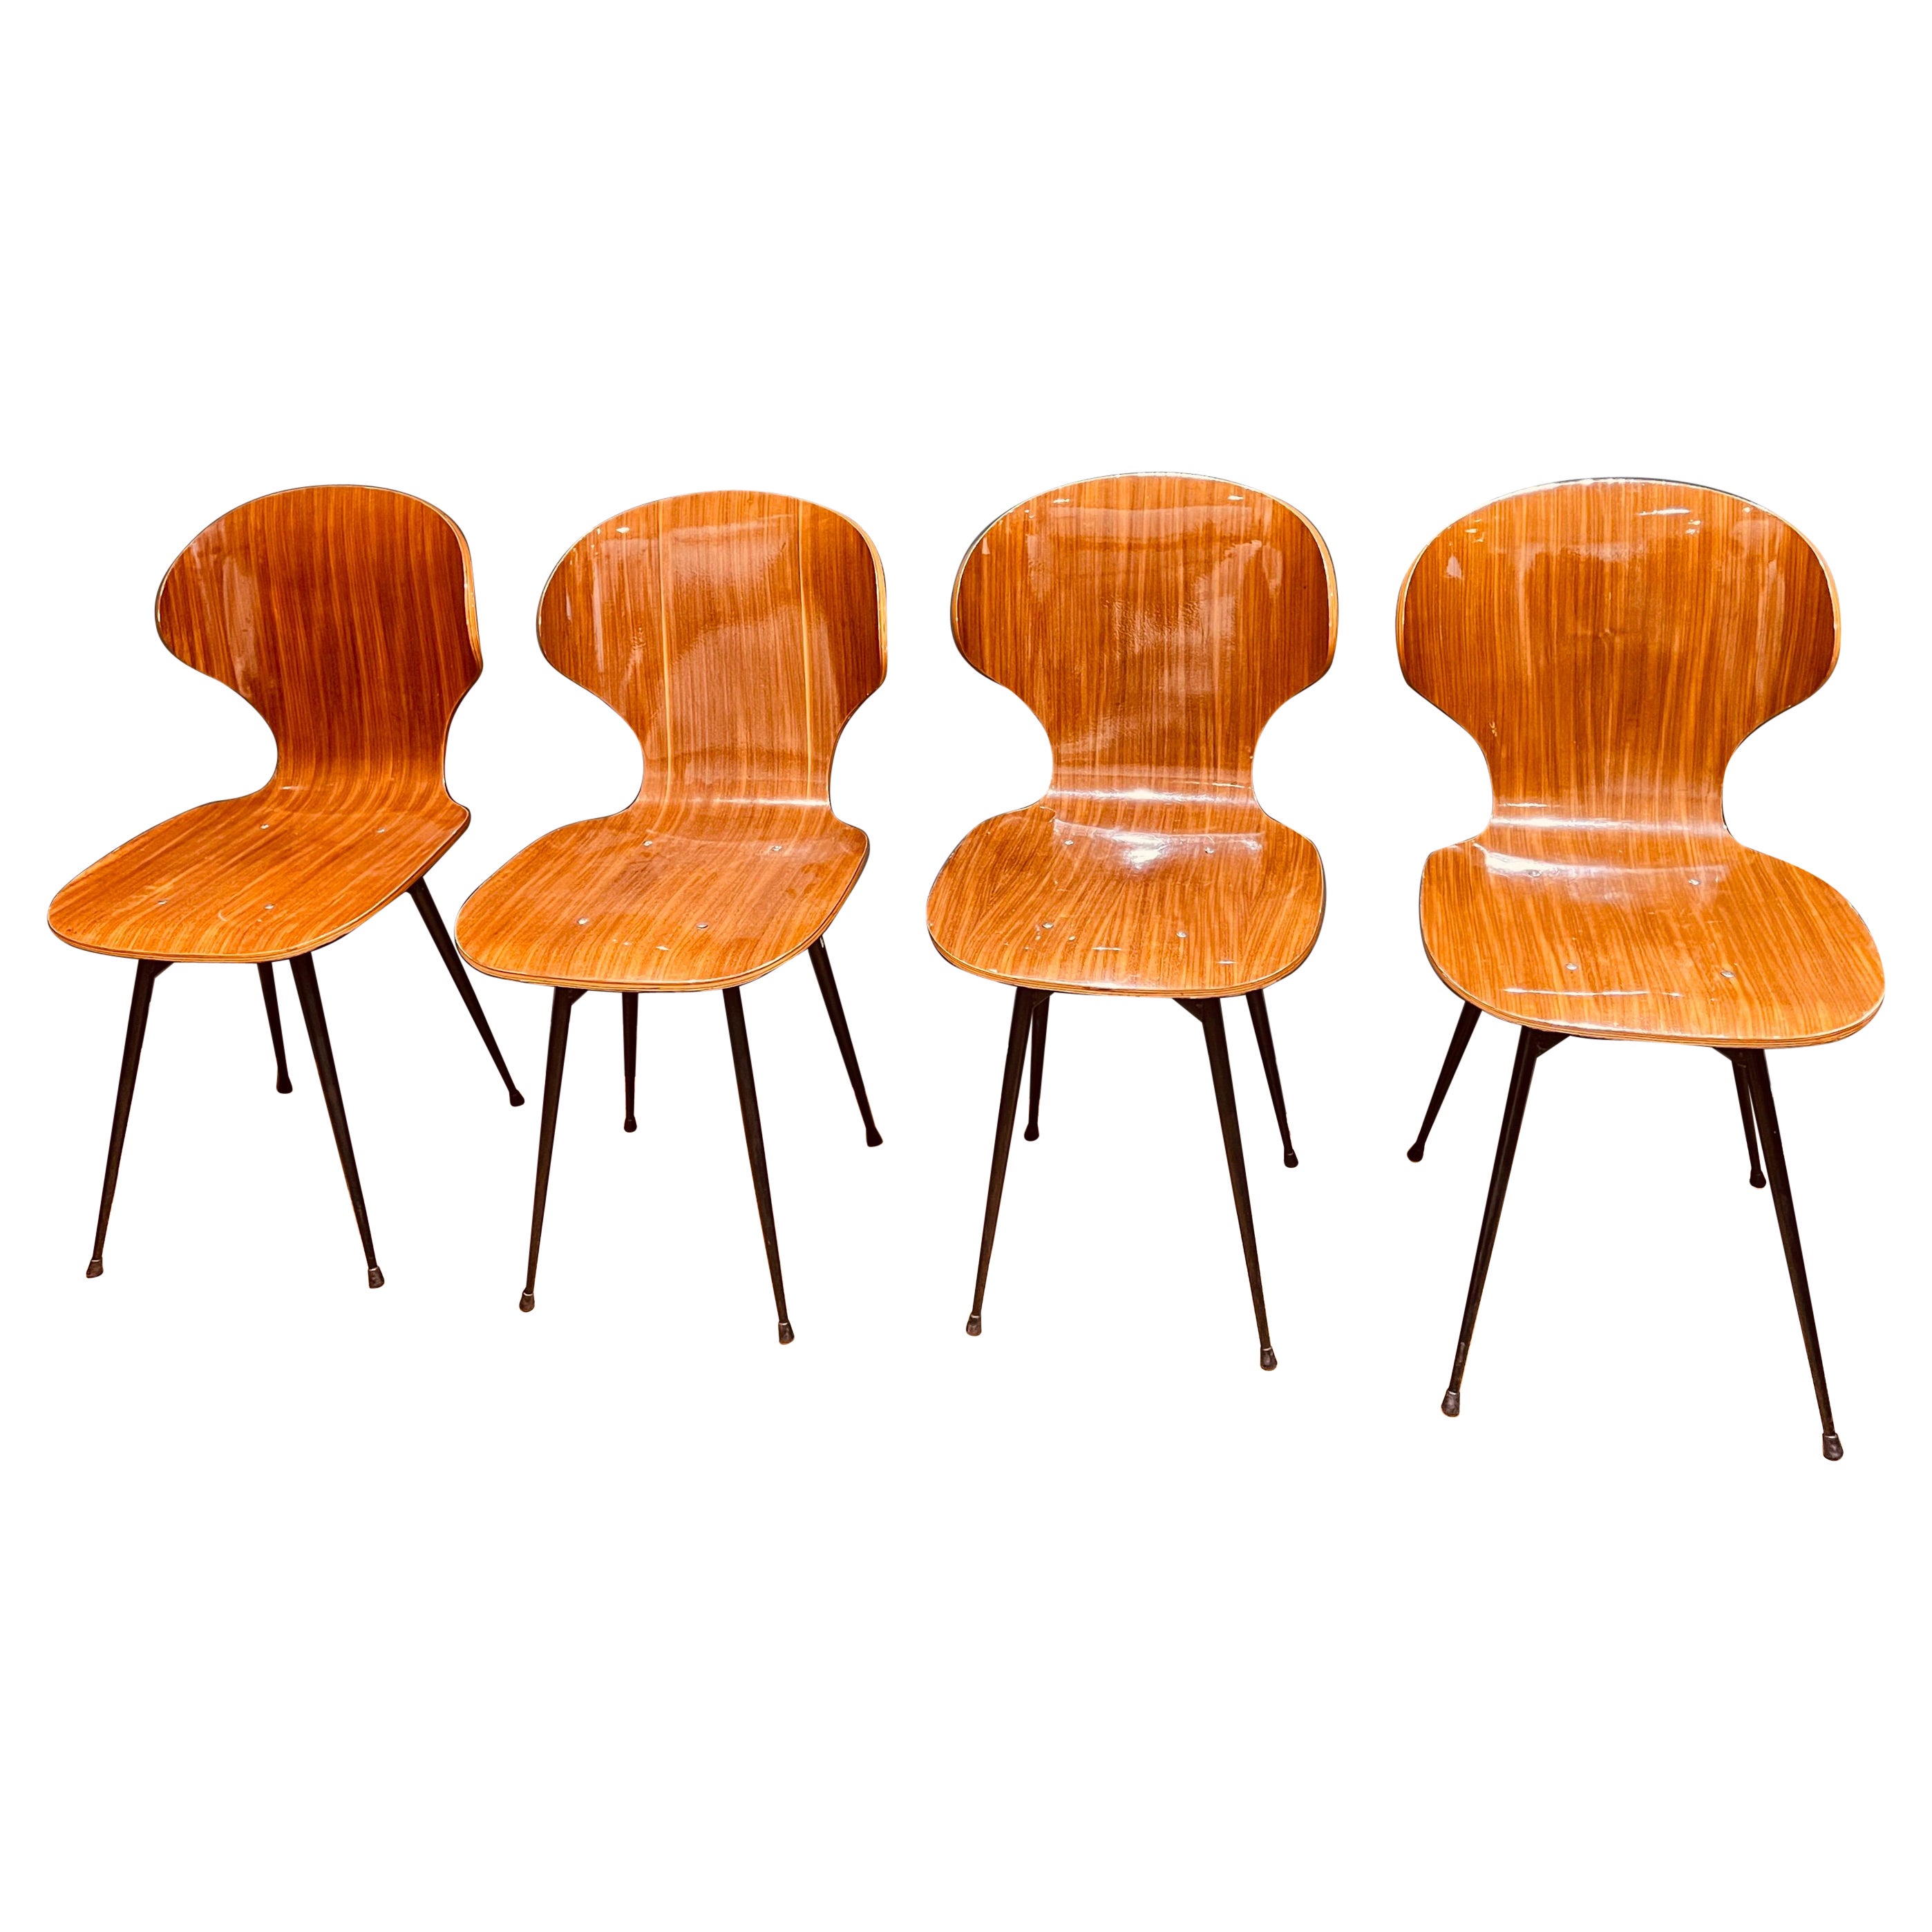 Set of 4 Bentwood Chairs by Carlo Ratti